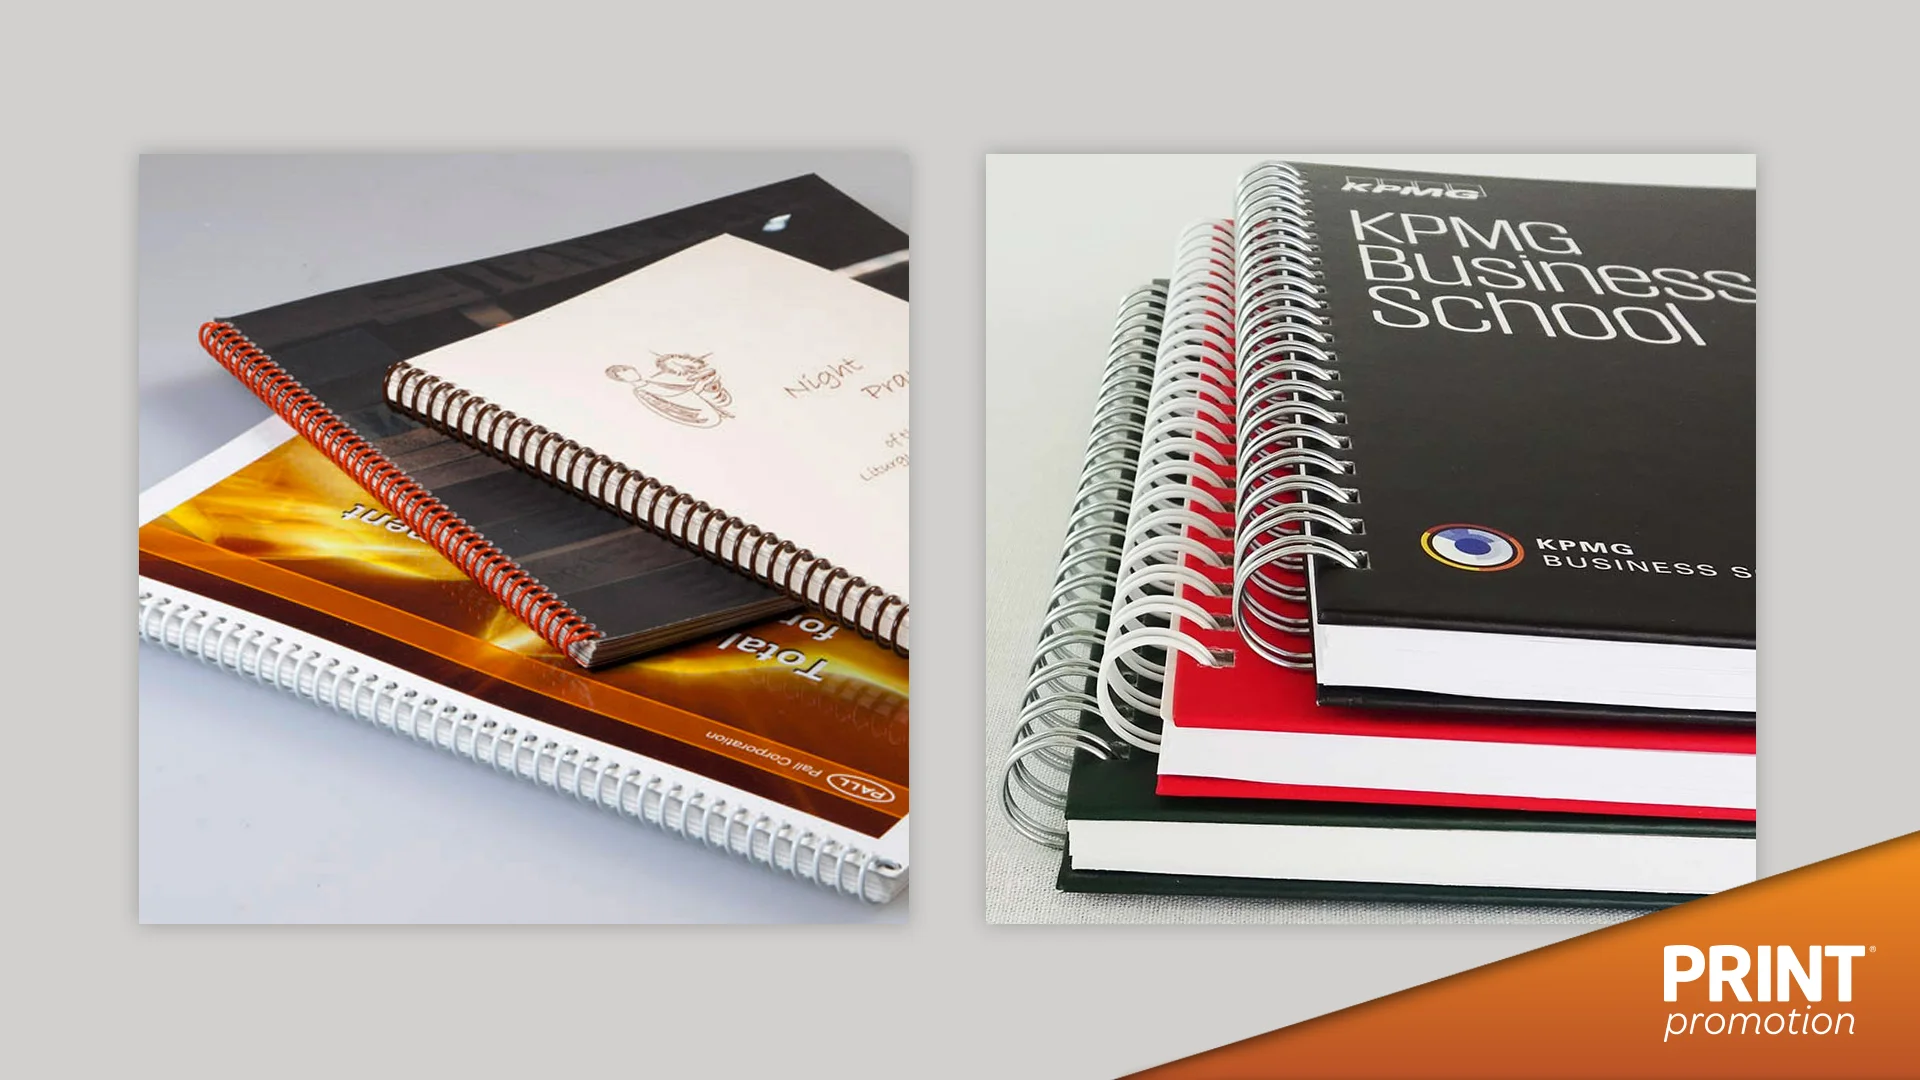 Buy China Wholesale Spiral Bound Hardcover Book Notebook Printing Wire-o Bound  Book Printing & Notebook,a6/a4/a5,paper,school,office Supplies $1.02 |  Globalsources.com